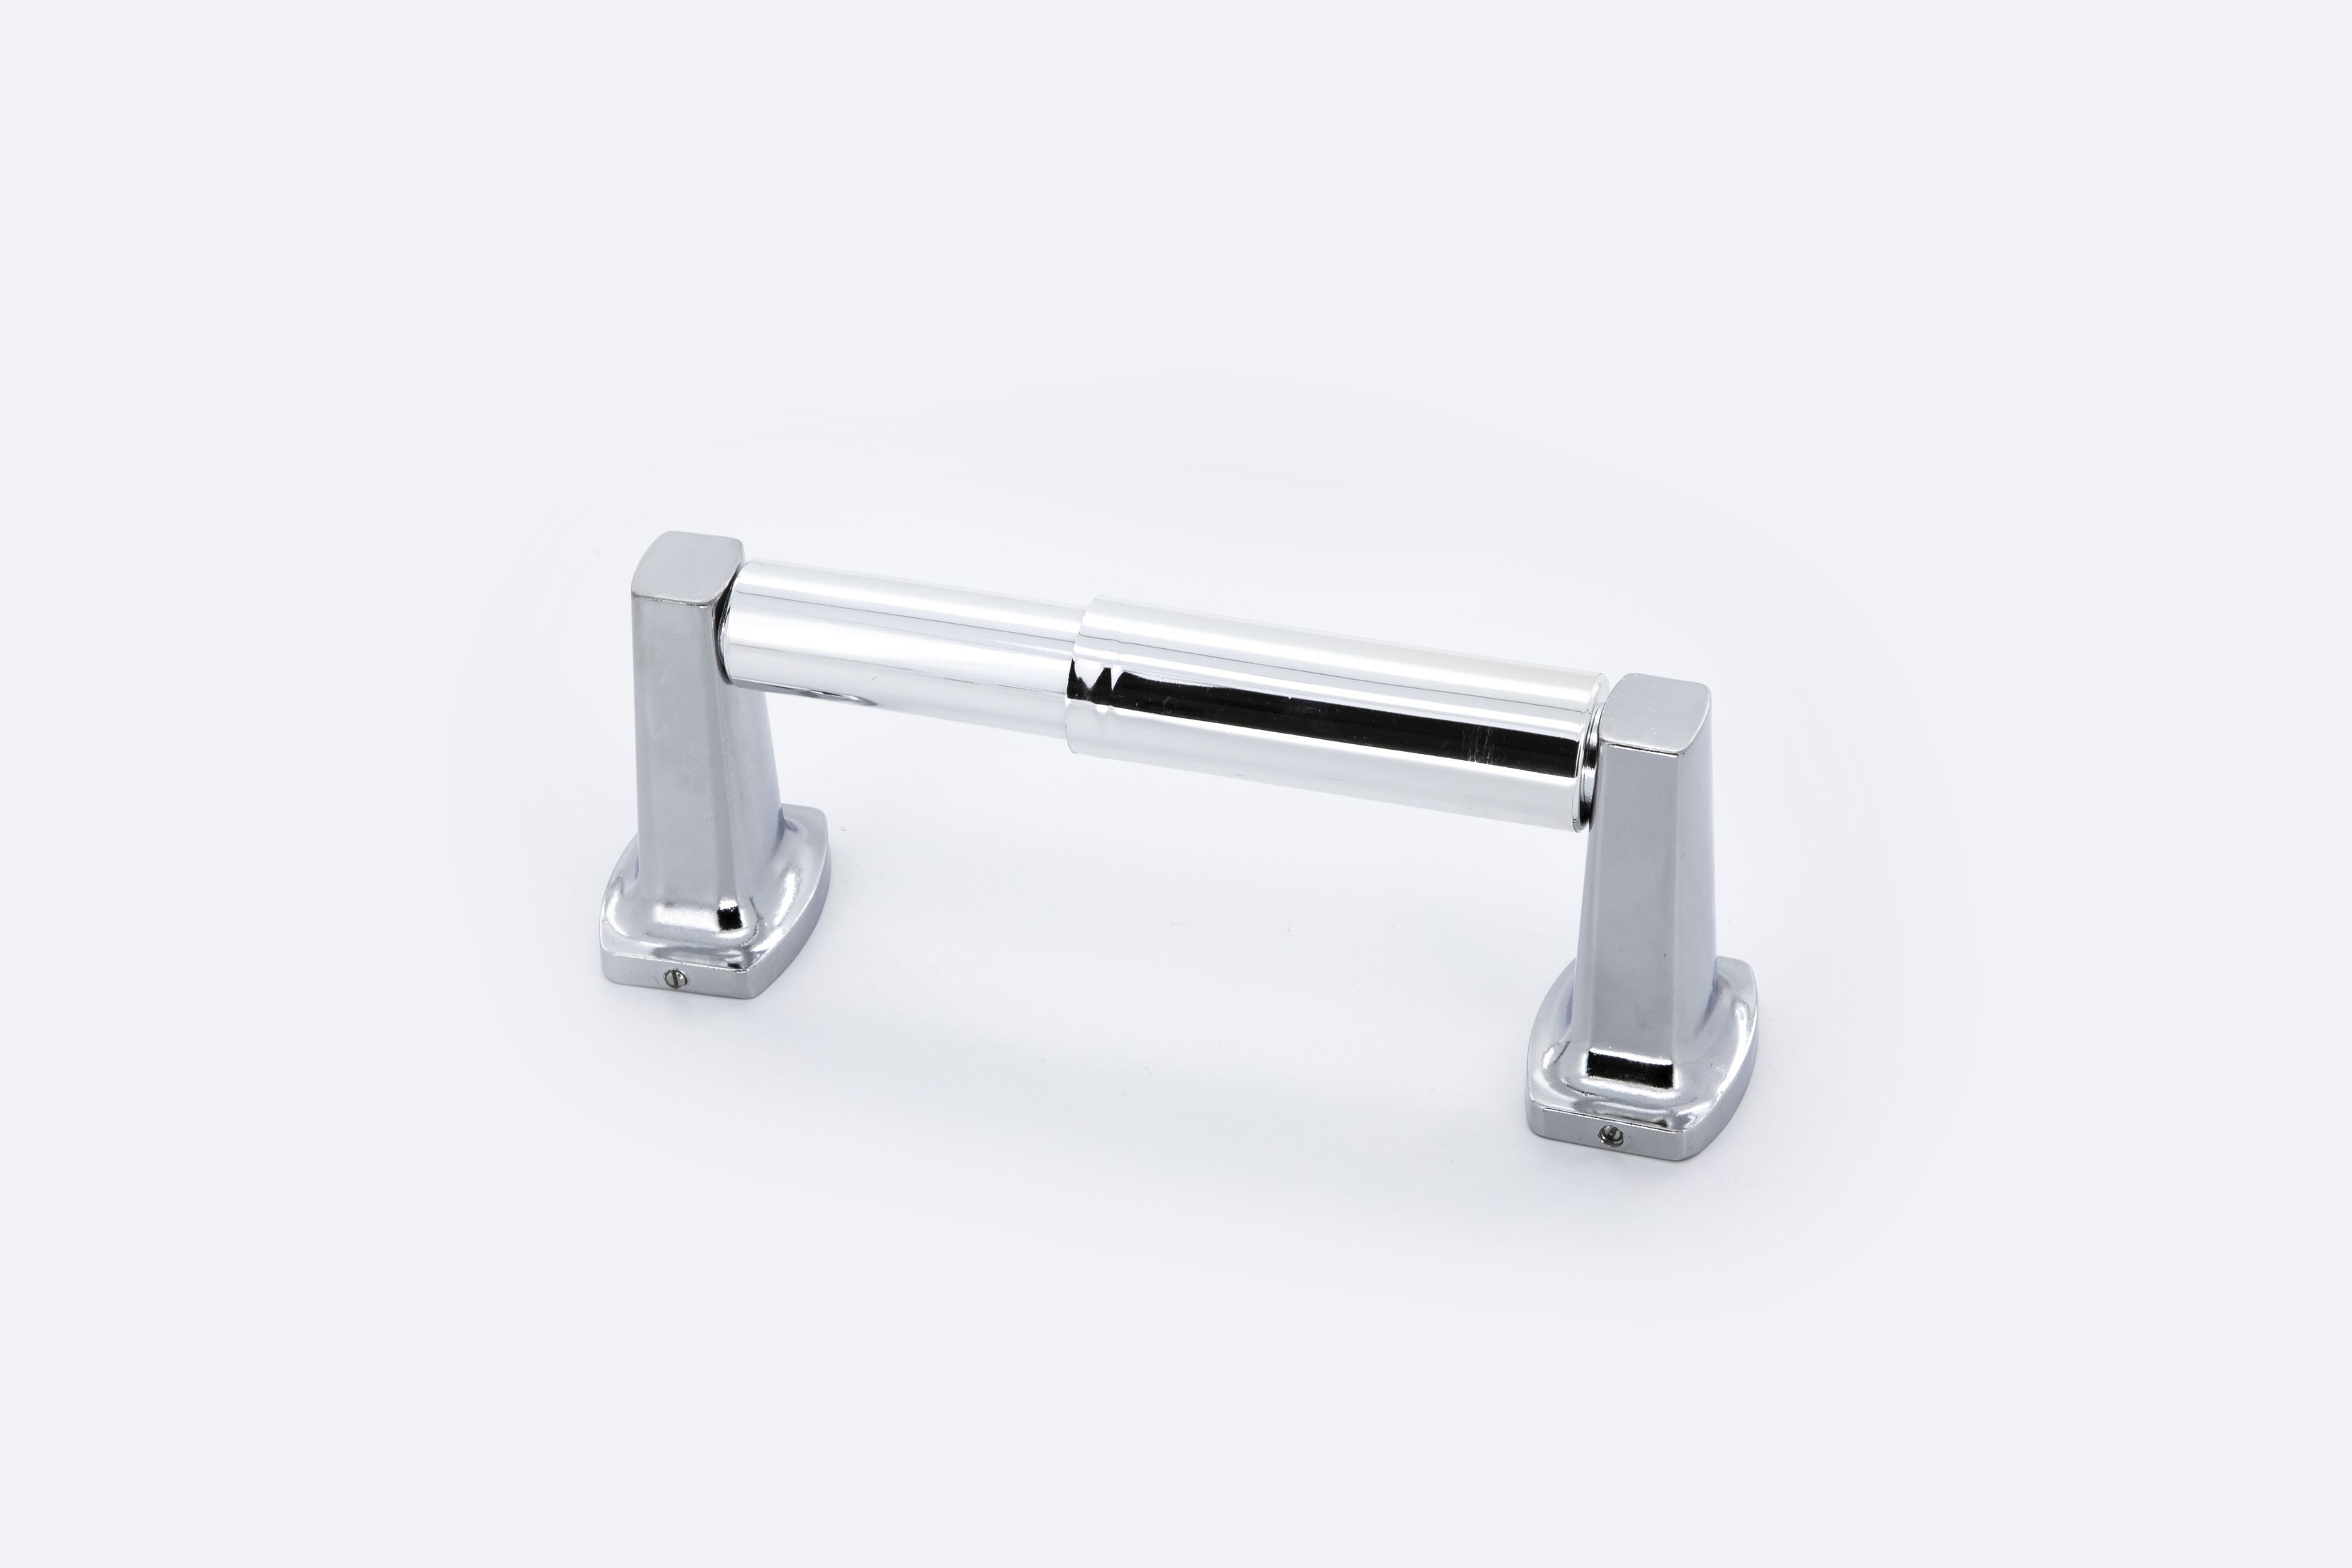 Mainstays Wall Mounted Toilet Paper Holder, Chrome Plating Finish